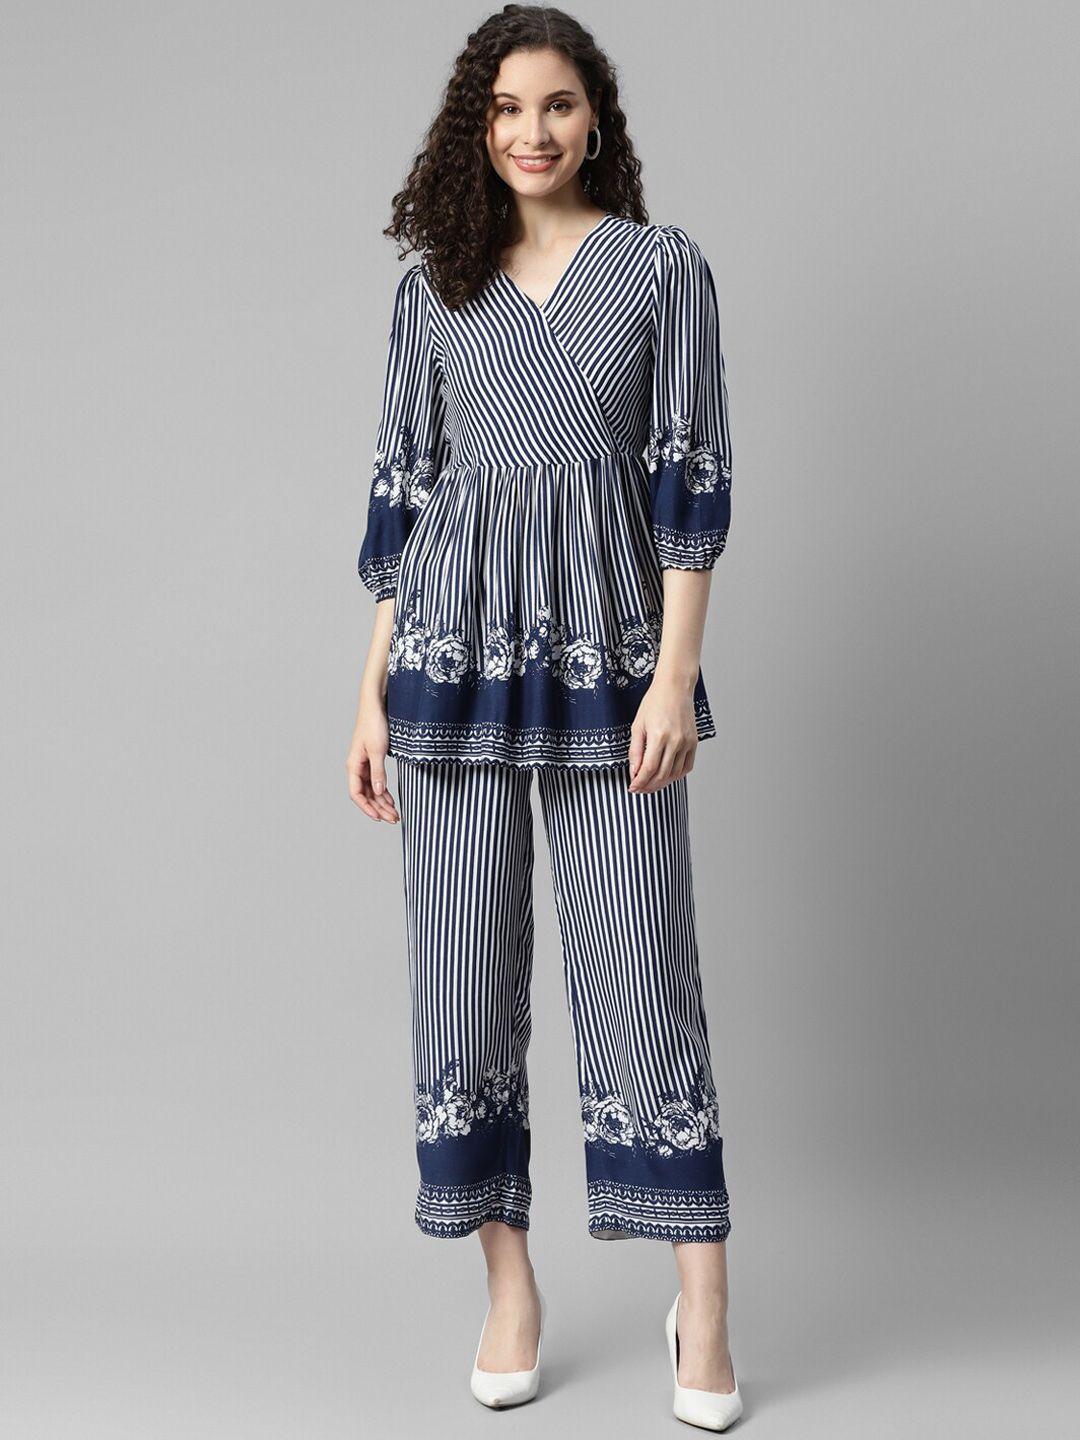 deebaco striped v-neck top with flared trouser co-ords